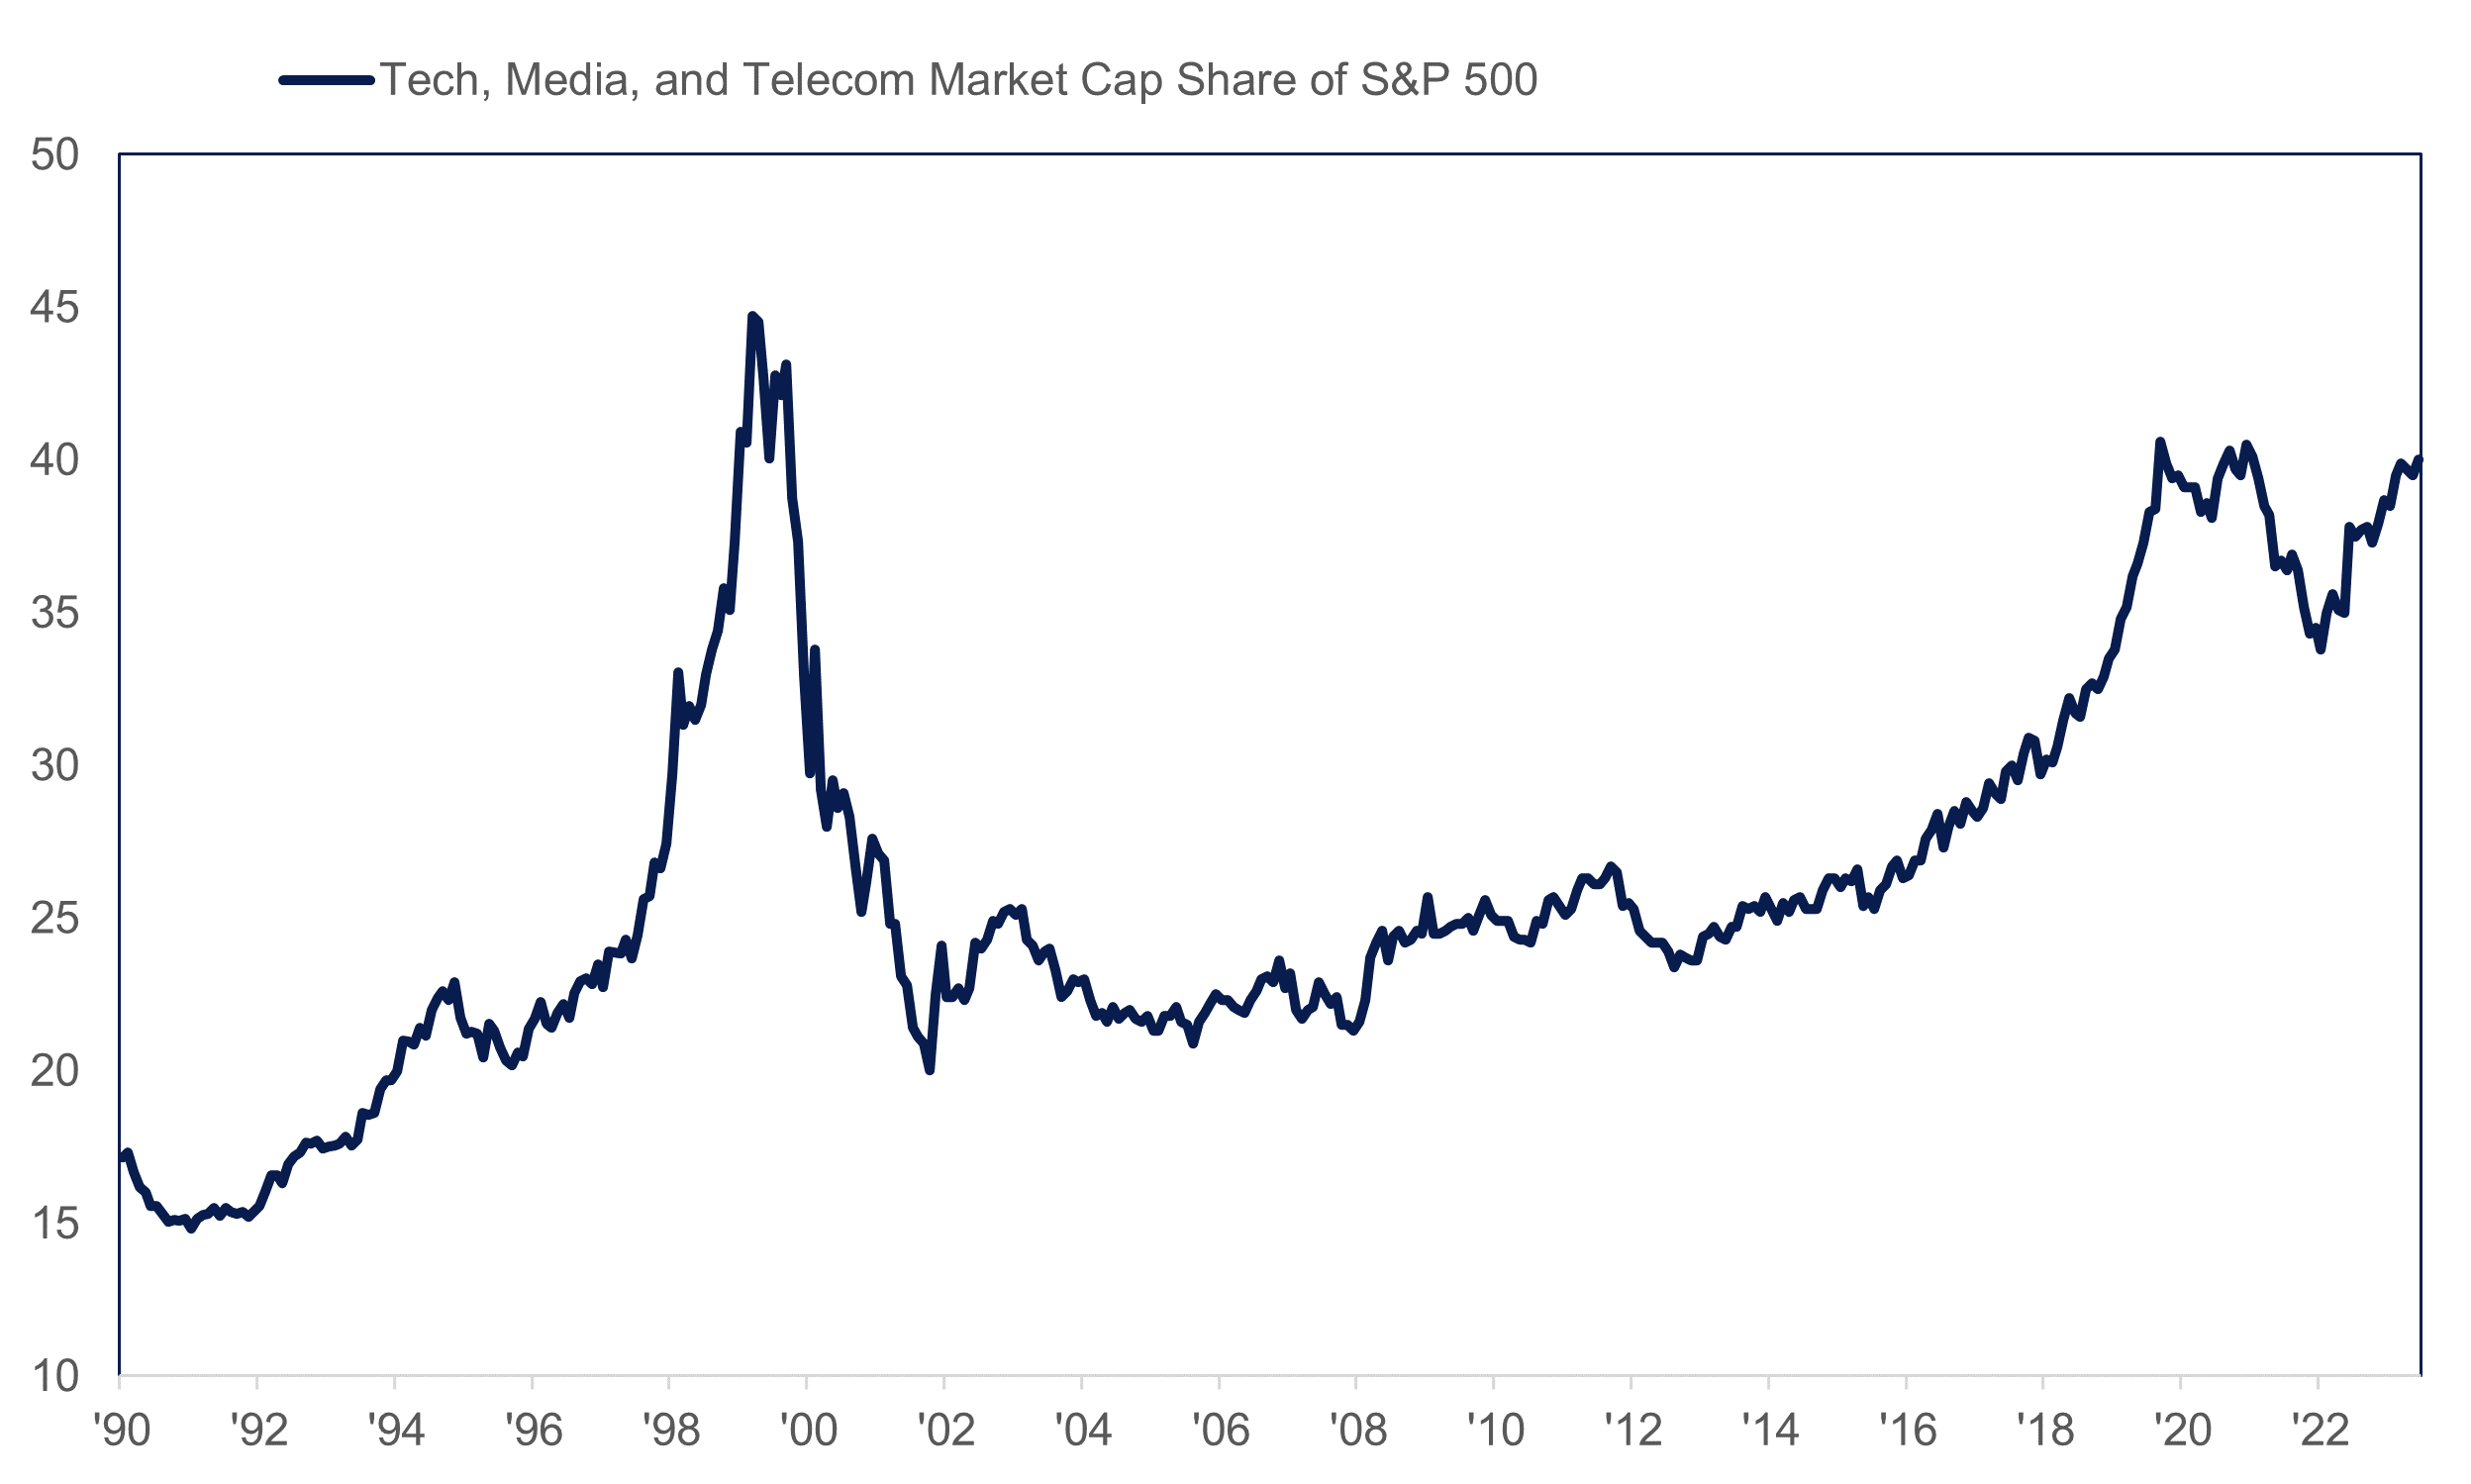 Line graph of tech, media, and telecom companies market share versus the S&P 500 from December 1990 to year to date as described in the preceding paragraph.